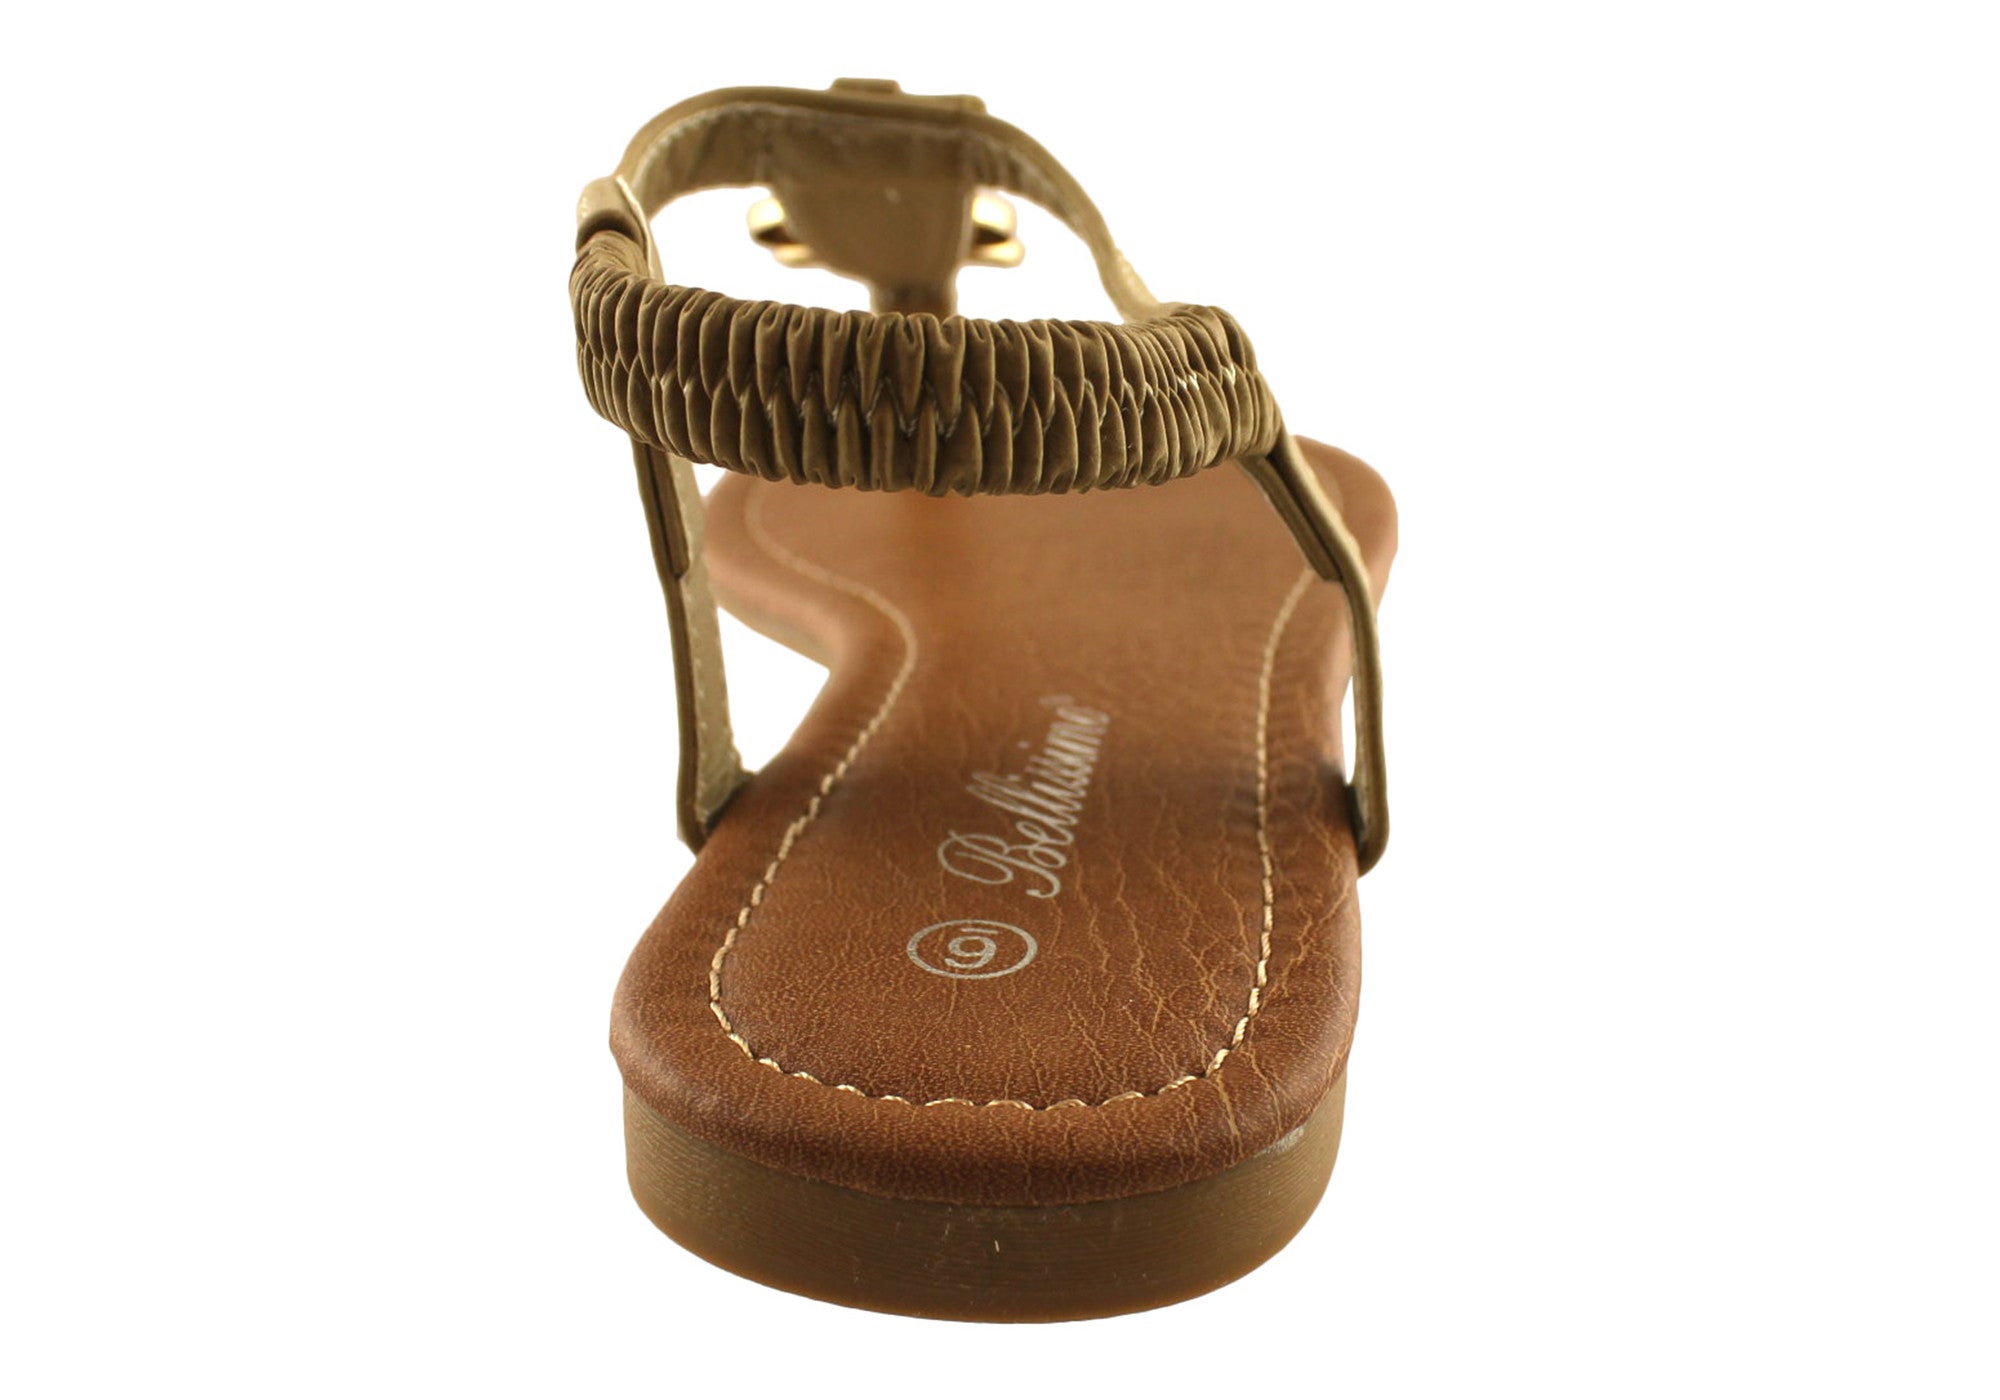 Bellissimo Link Womens Fashion Sandals